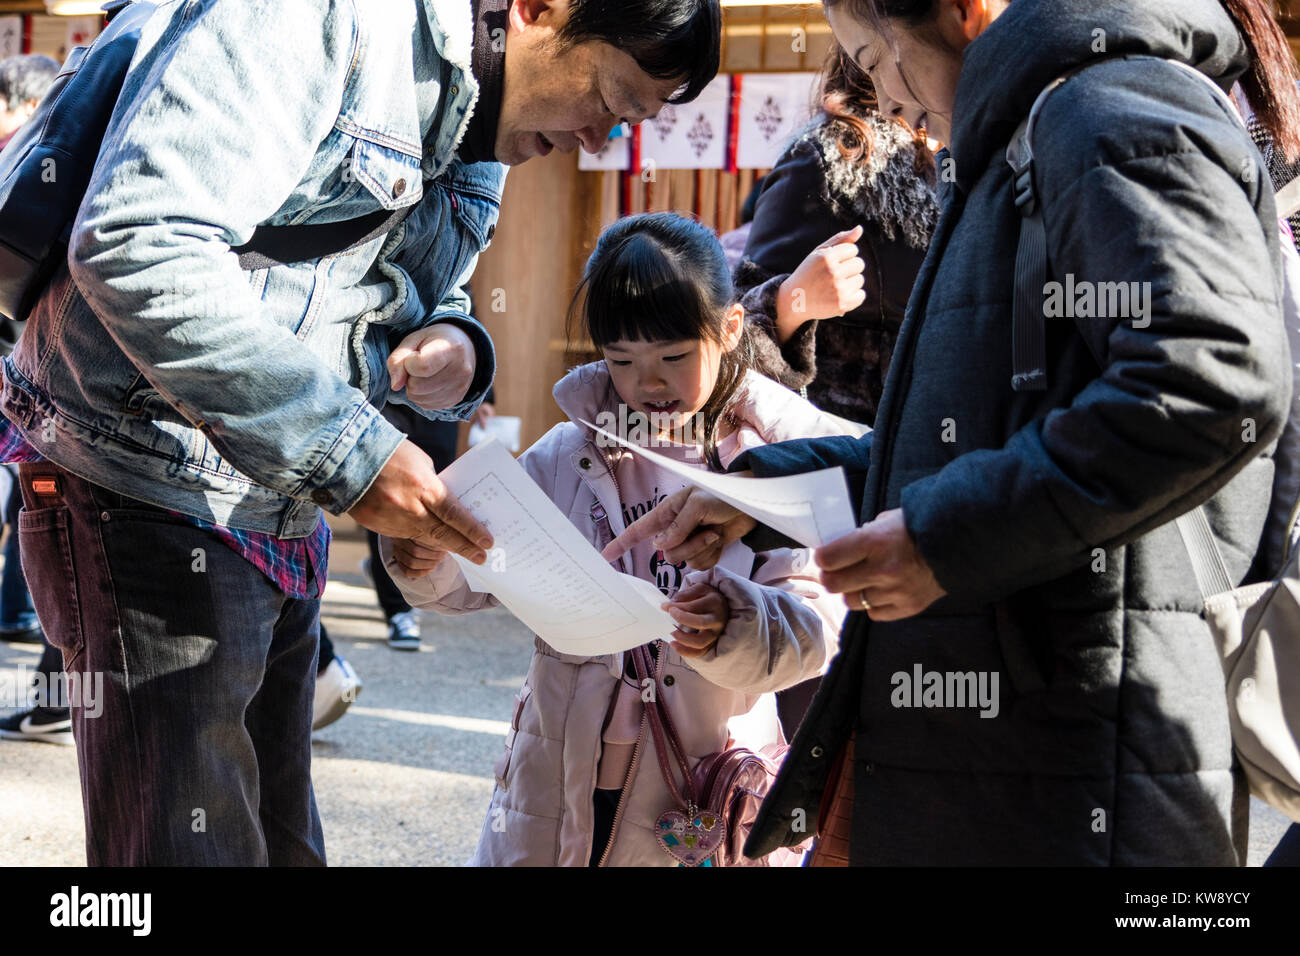 Japan, Nishinomiya Shinto Shrine. New year's day, Shogatsu. Family on Hatsumode visit, (first visit of the new year), reading a fortune paper, Omikuji to their child daughter. She looks happy and smiling as they bend to explain. Stock Photo